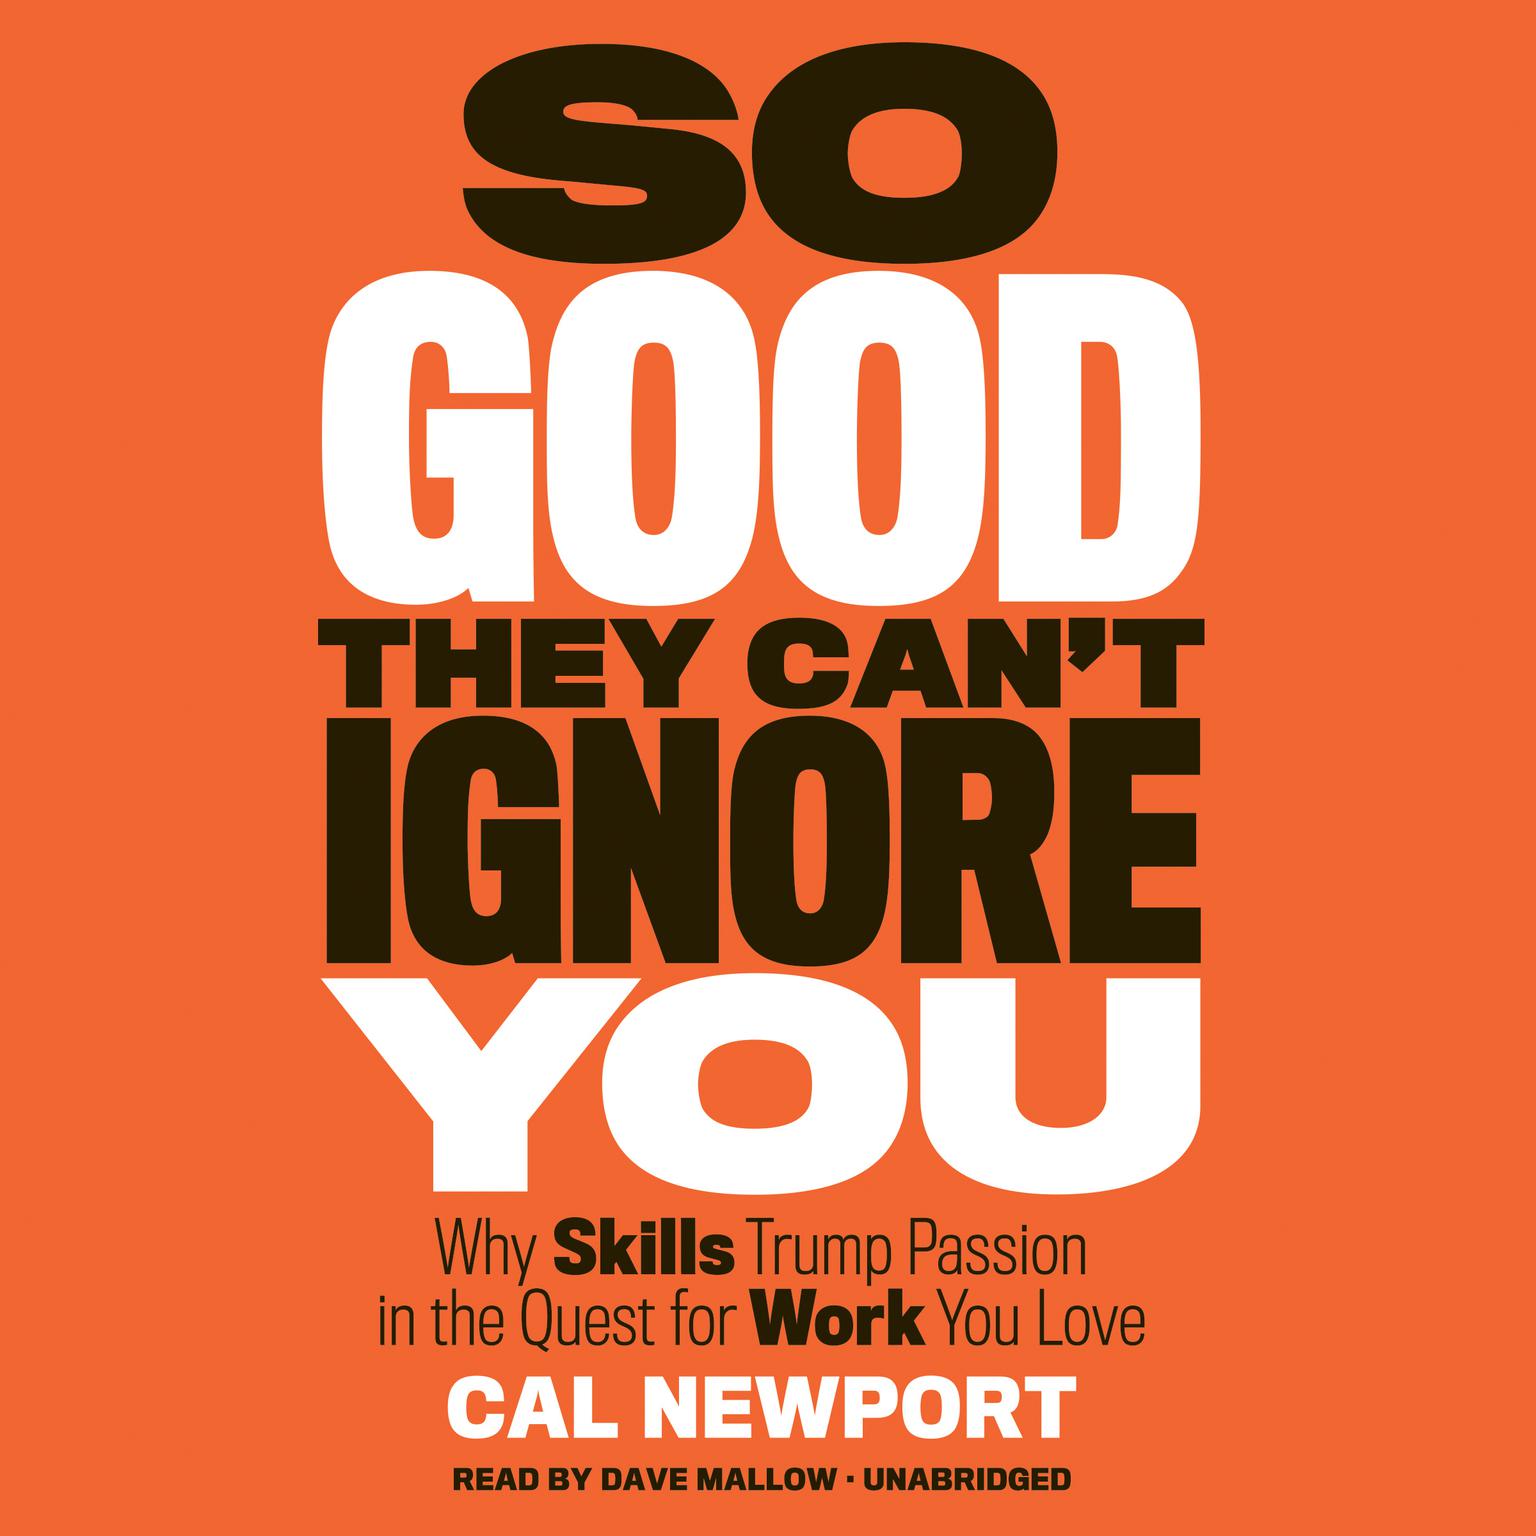 So Good They Can’t Ignore You: Why Skills Trump Passion in the Quest for Work You Love Audiobook, by Cal Newport